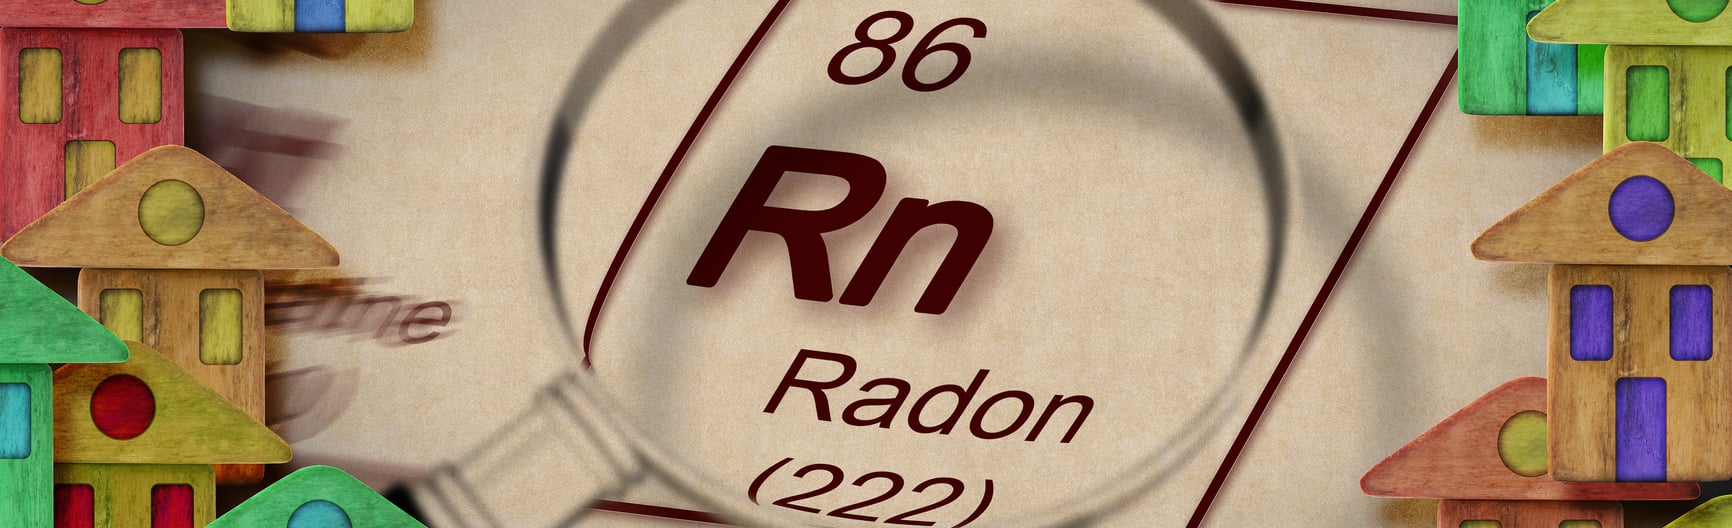 Illustration of radon on periodic table with magnifying glass